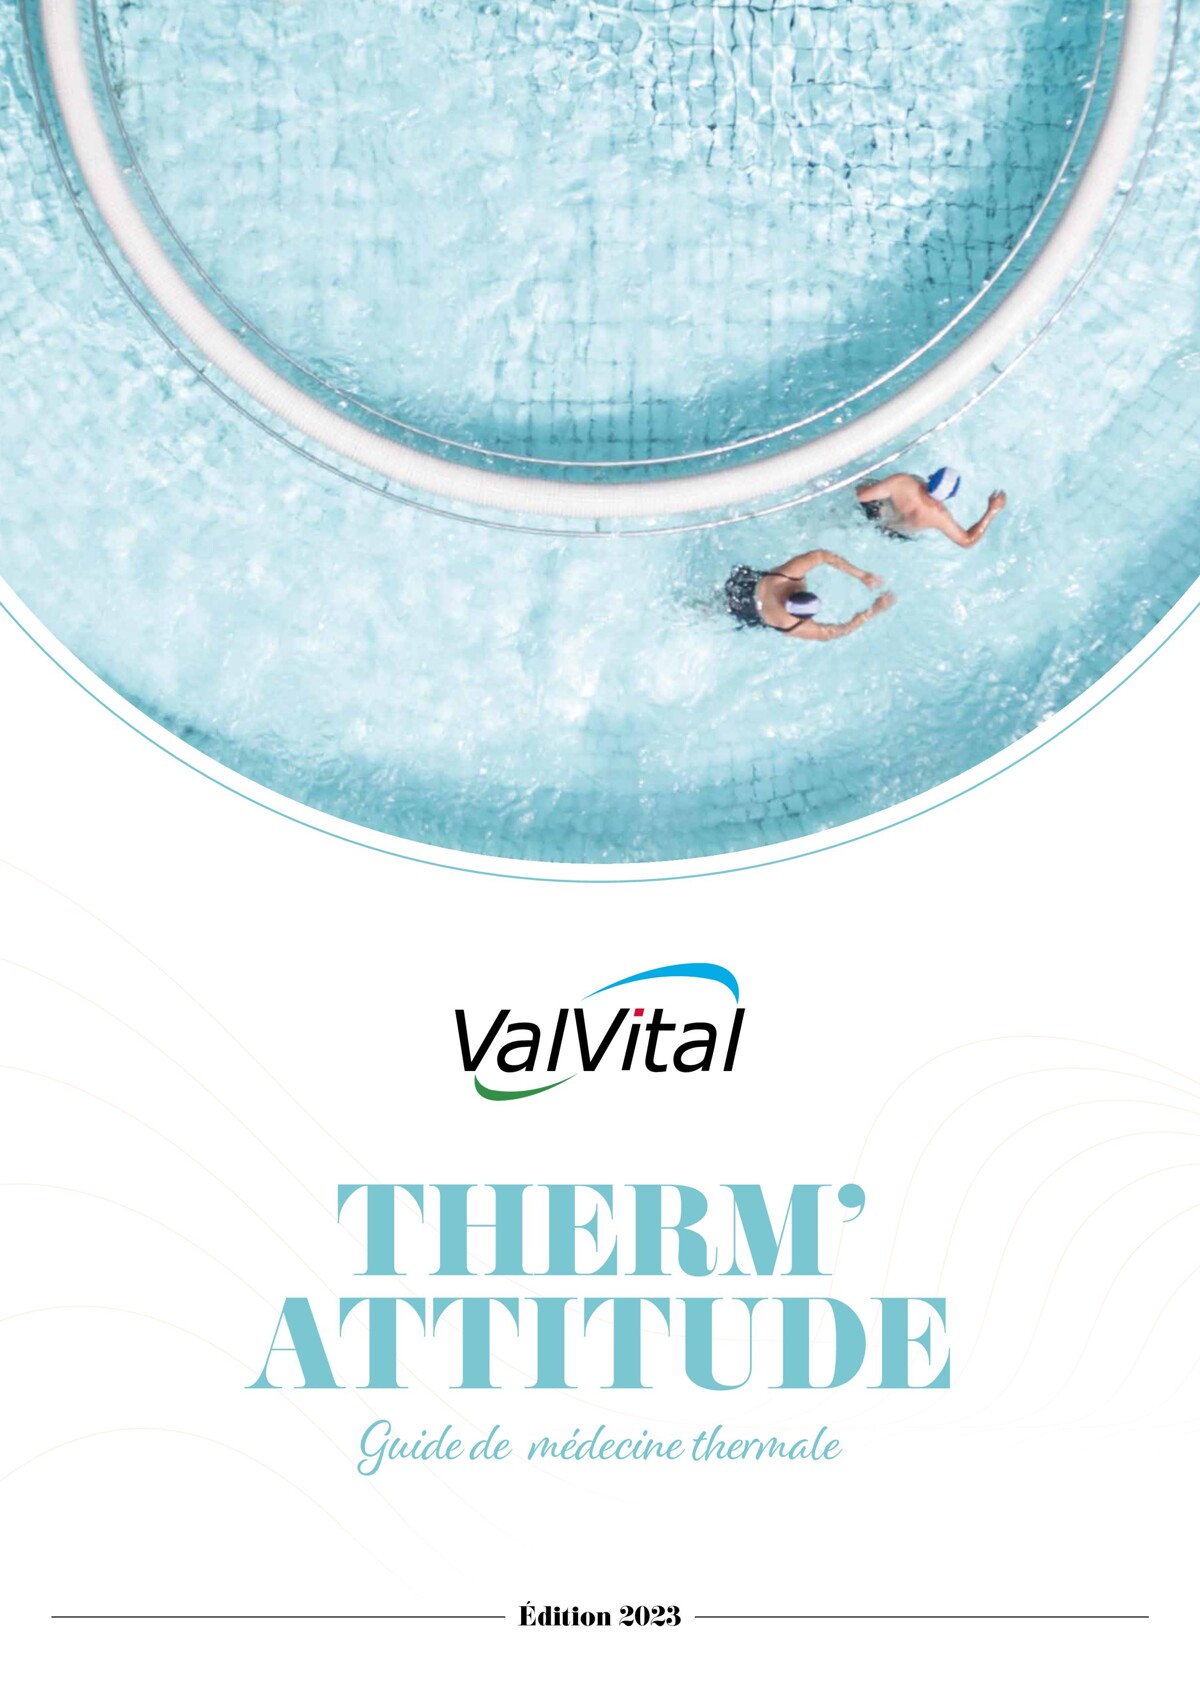 Catalogue CURE Therm'attitude ValVital 2023, page 00001